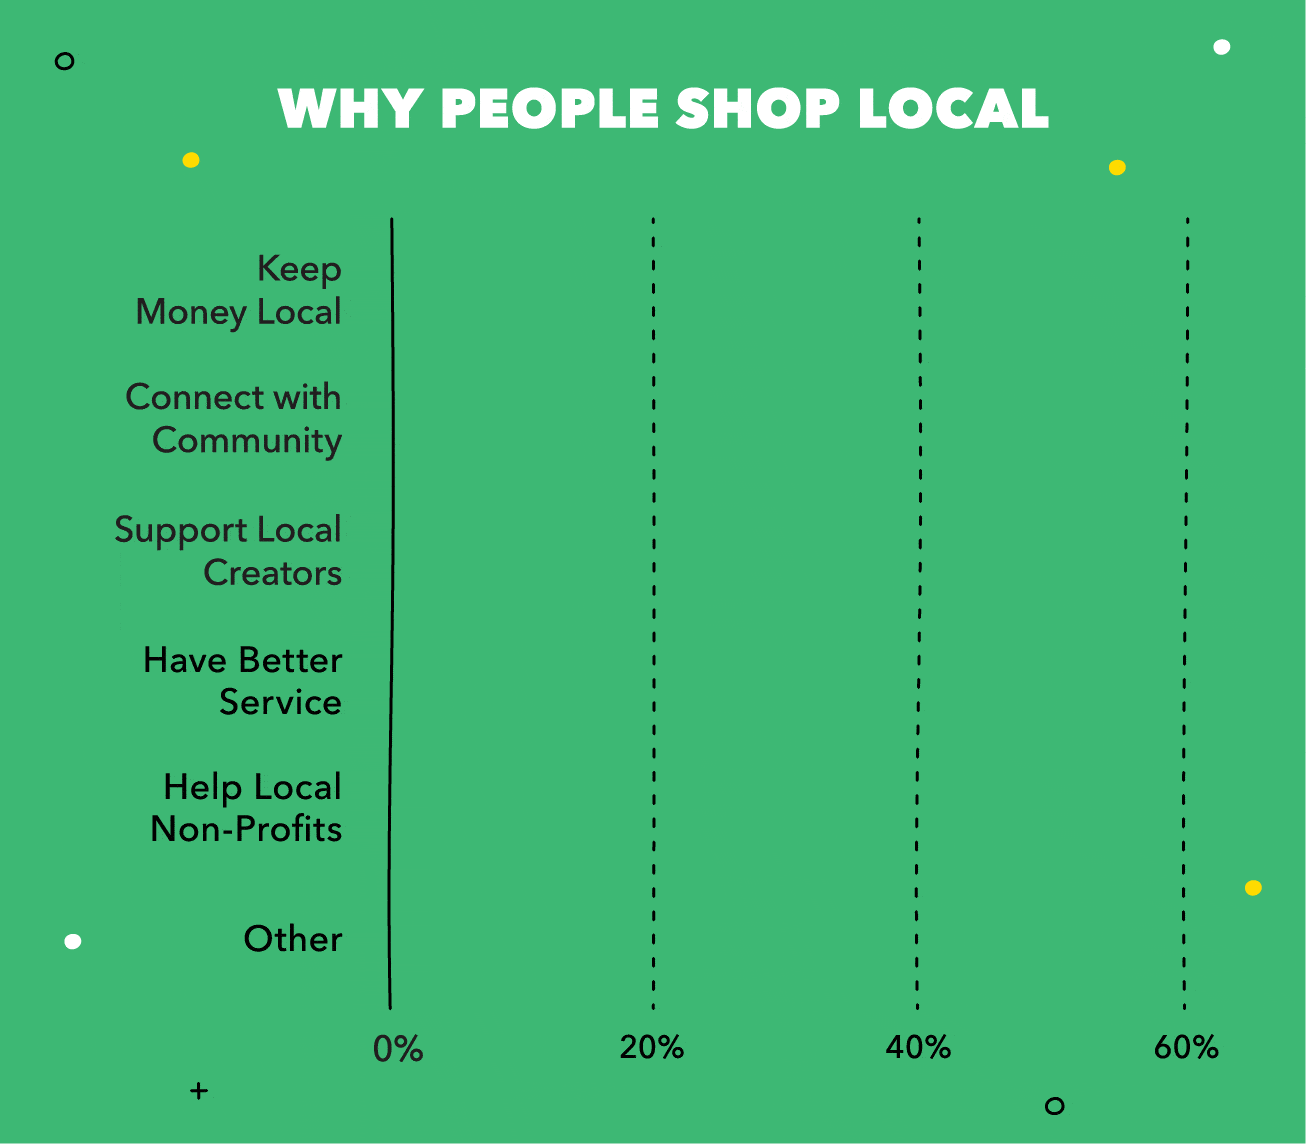  People buy from small businesses to connect with a community, and small business blogs help build unique communities.